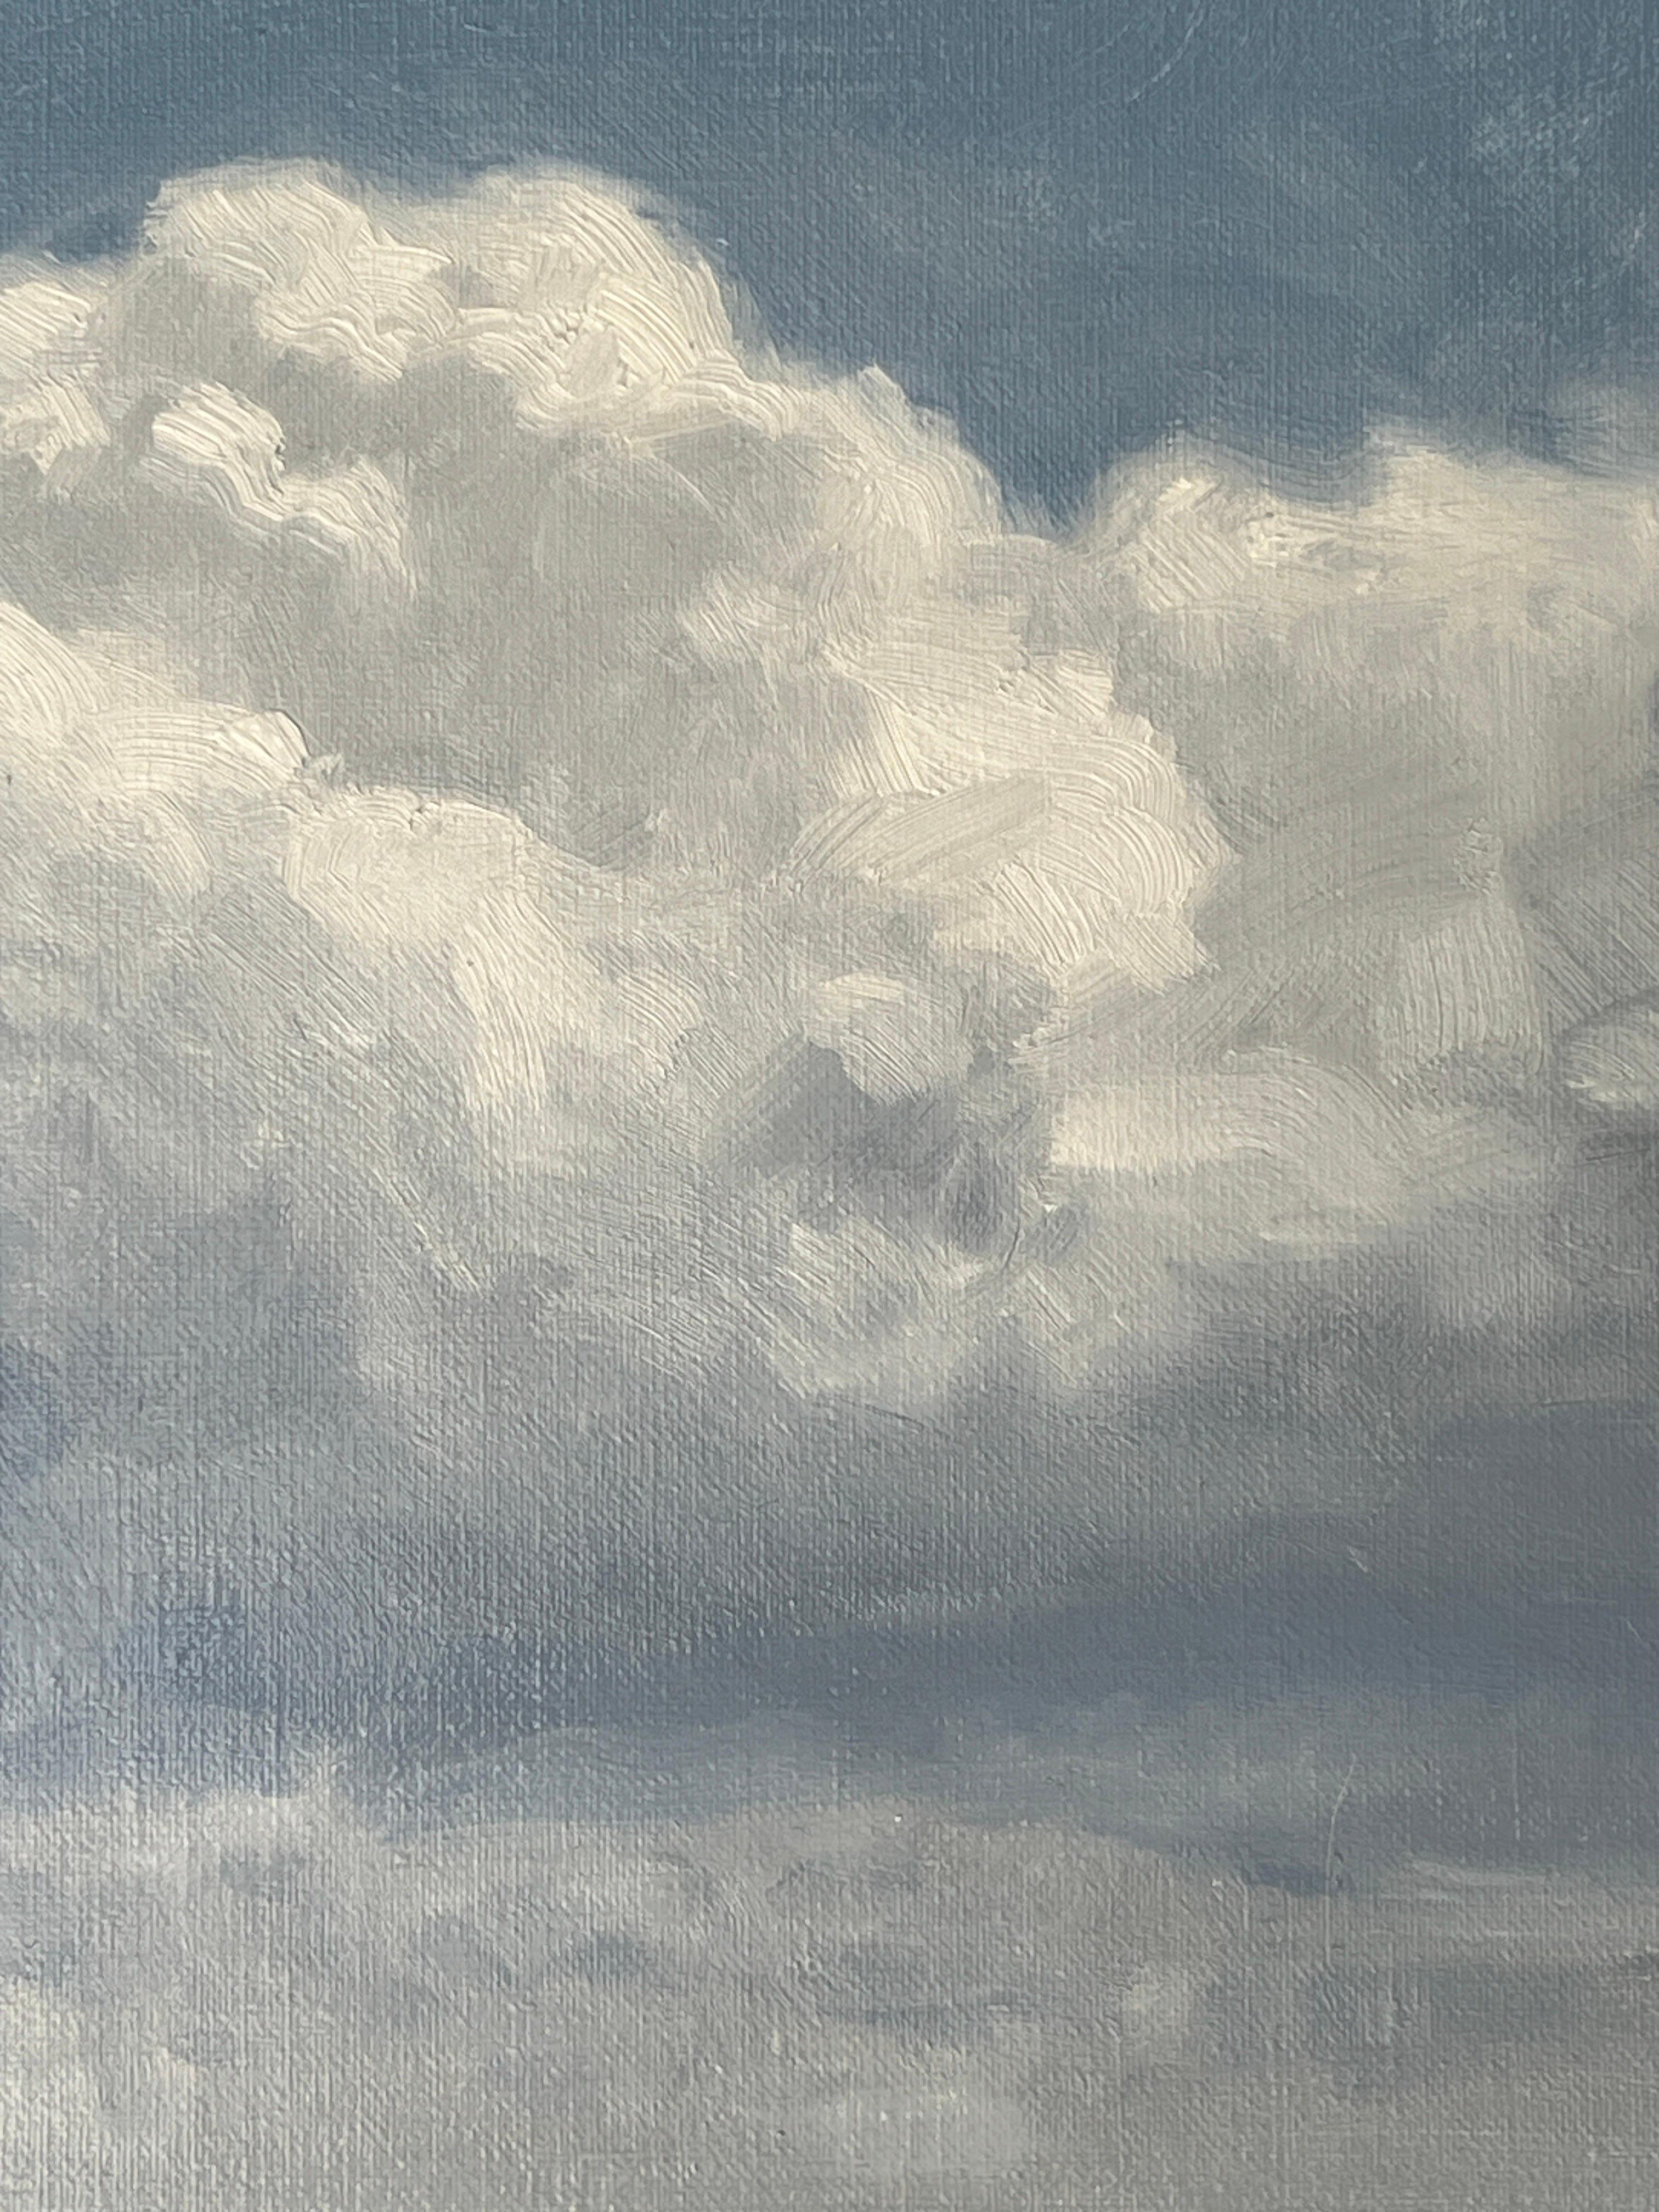 Clouds Over the Sea 1